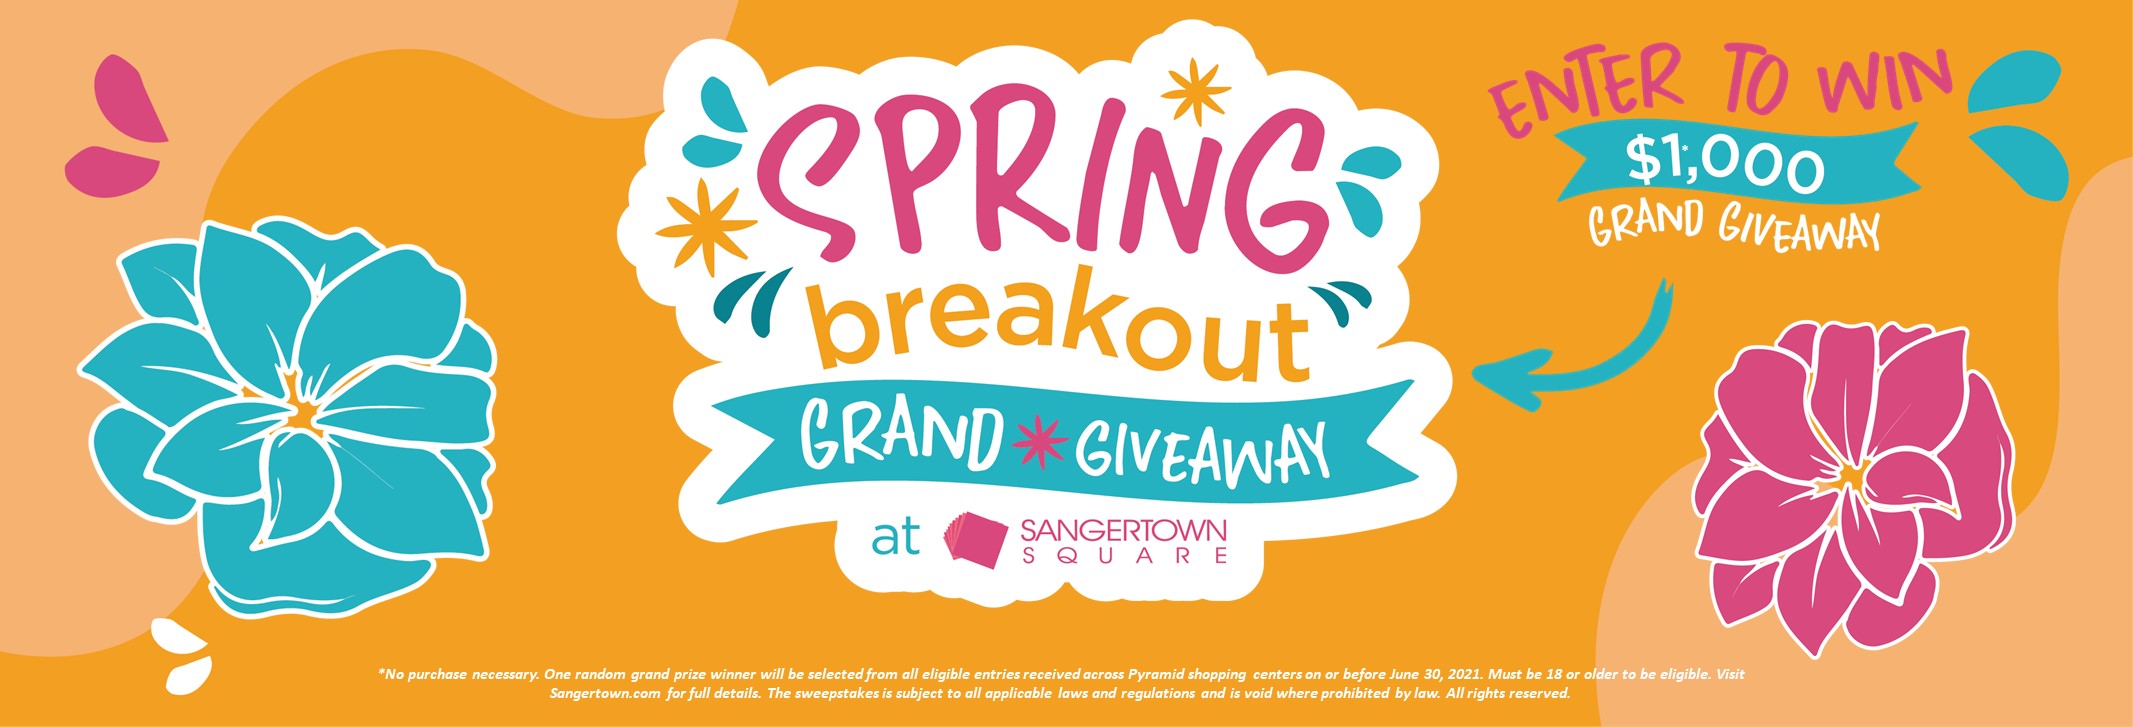 Spring Breakout Grand Giveaway